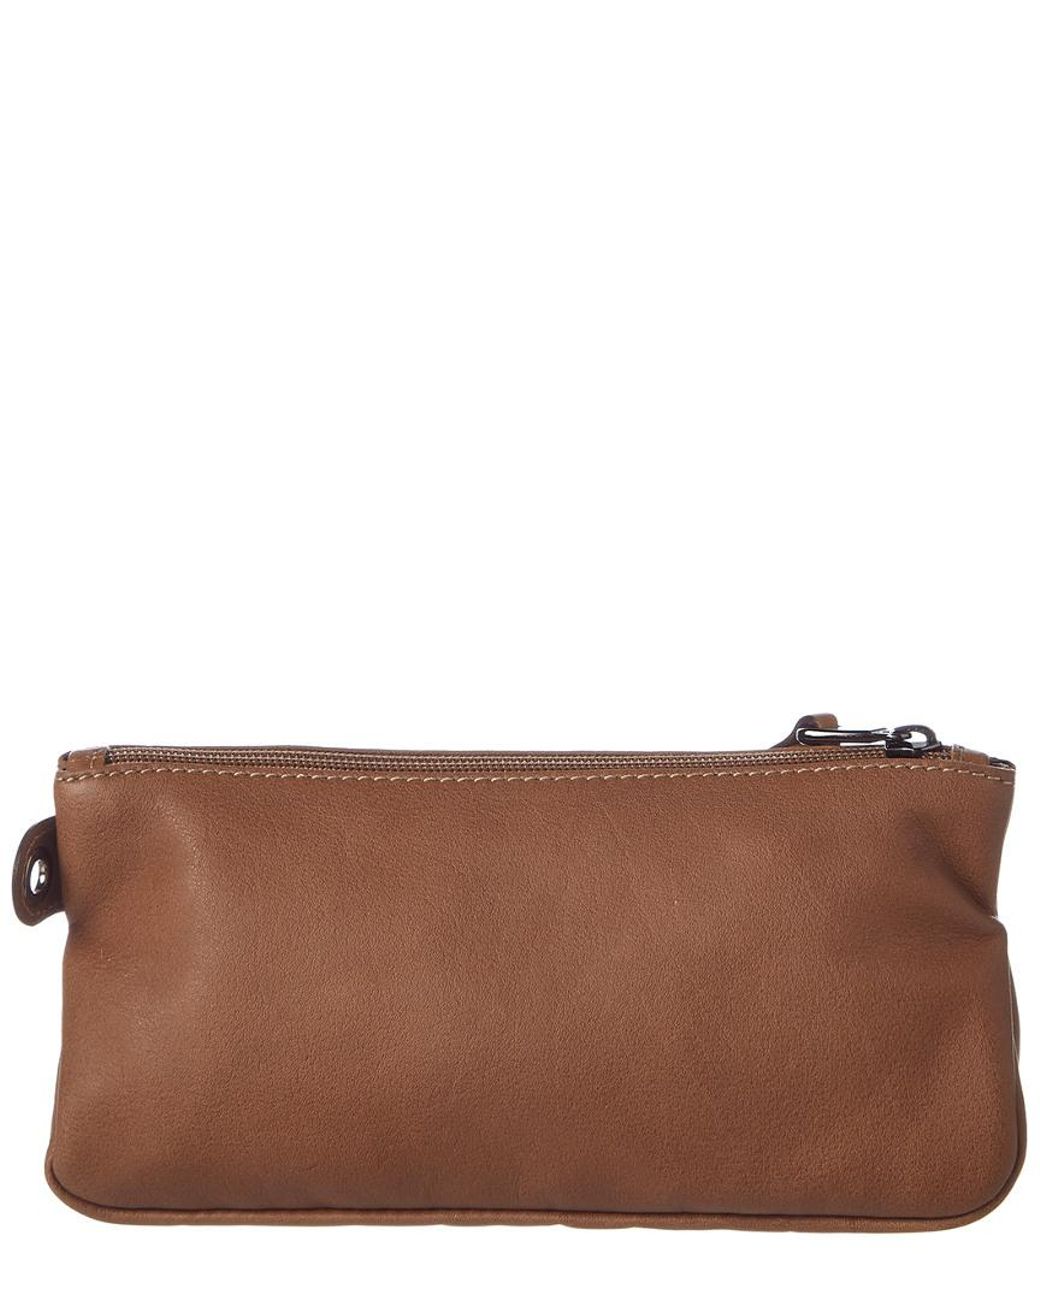 Longchamp 3d Leather Pouch in Brown | Lyst